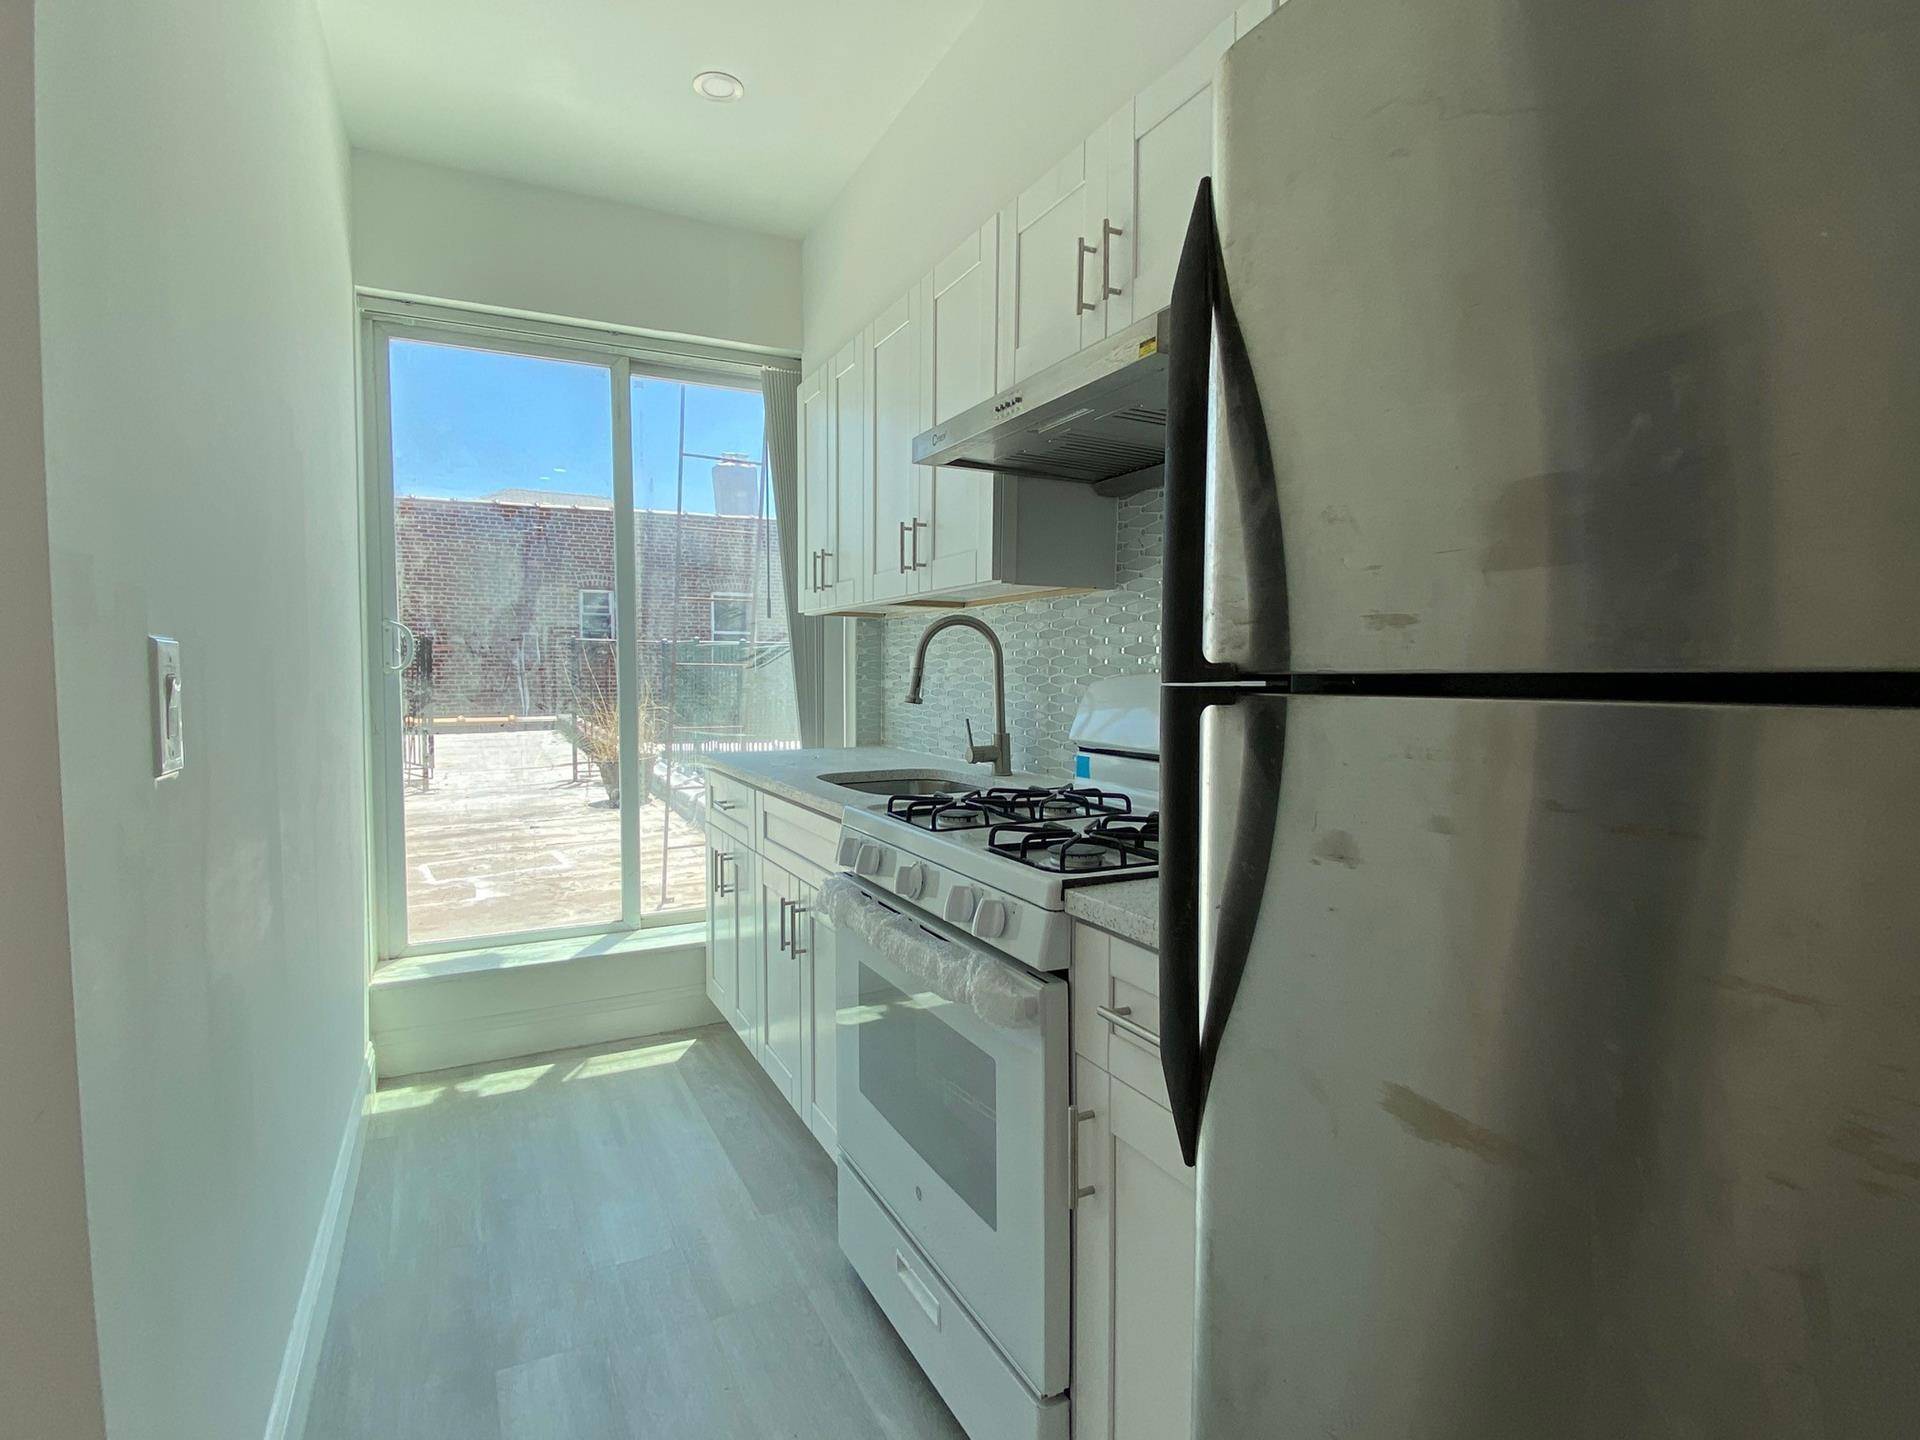 Newly renovated with 3 bedrooms 1 bath and a private outdoor terrace off the living room kitchen.